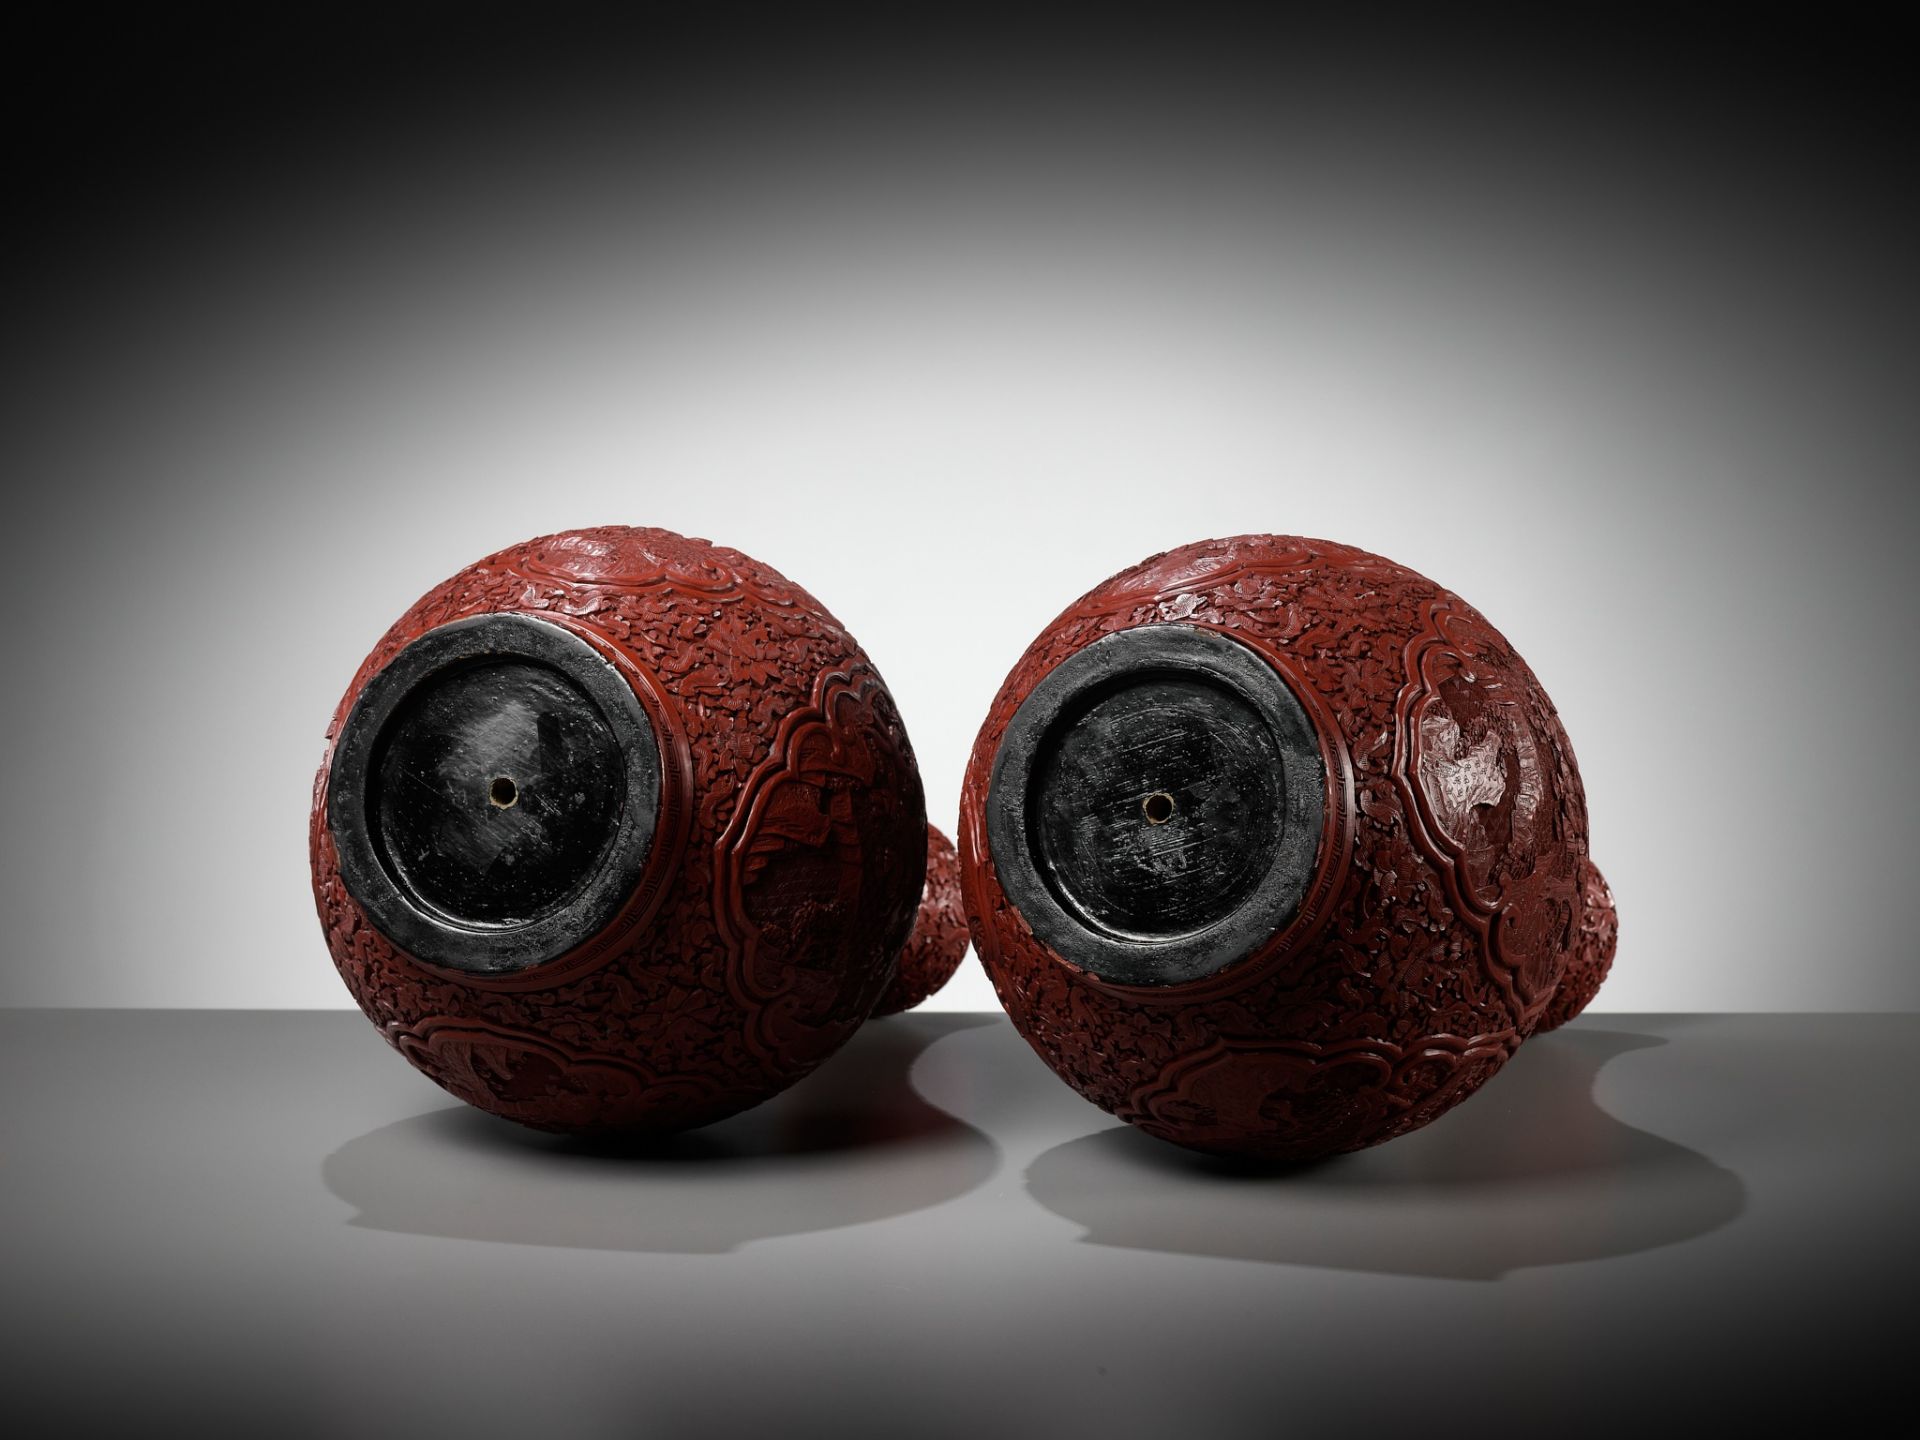 A PAIR OF LARGE CINNABAR LACQUER GARLIC HEAD VASES, CHINA, 1800-1850 - Image 13 of 14